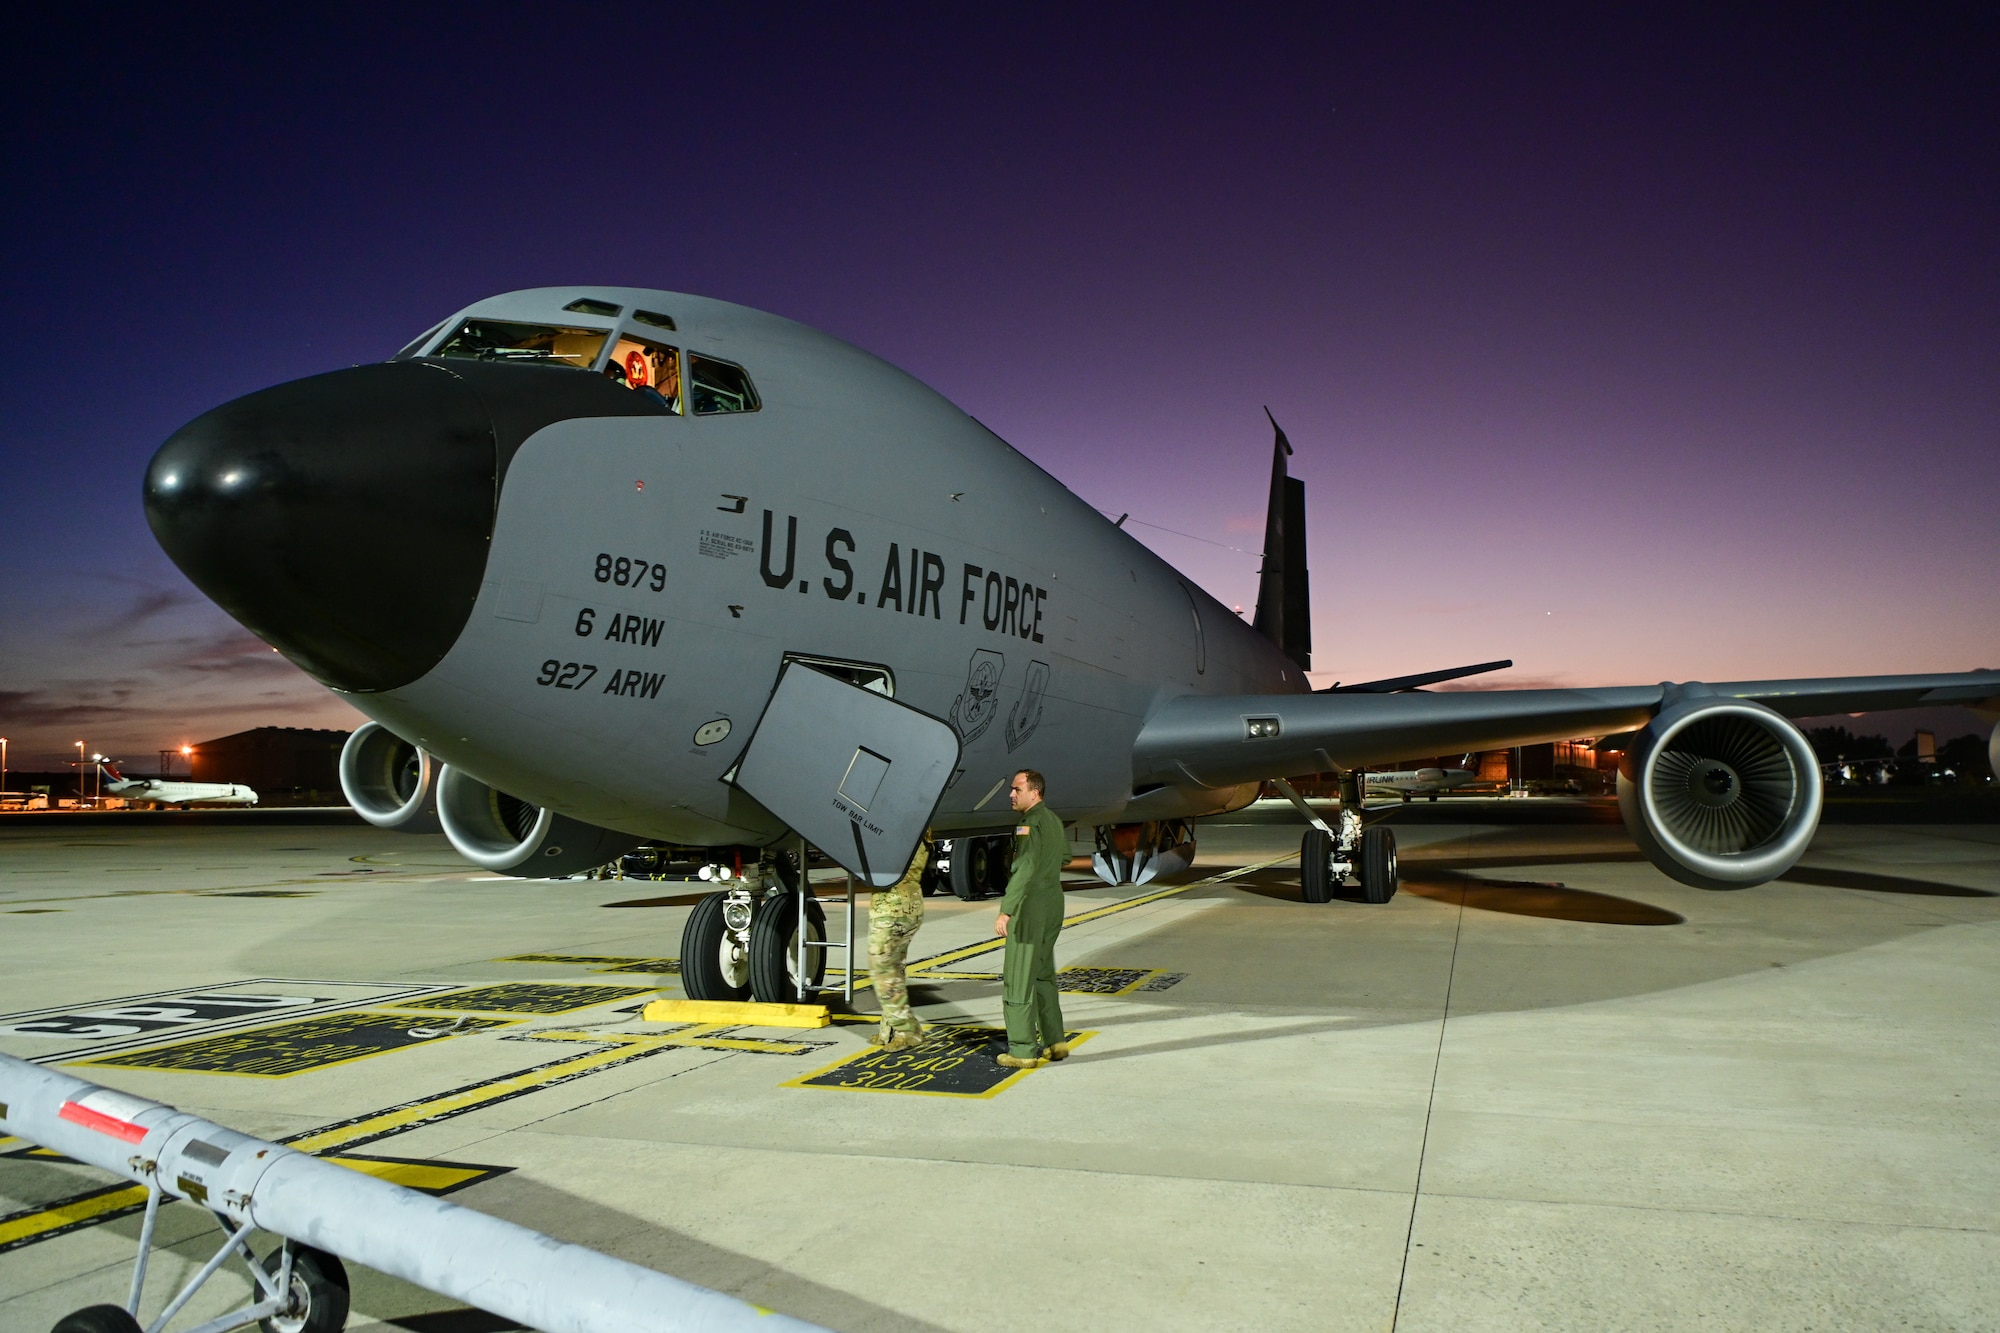 A KC-135 Stratotanker sits on the flight line as the sun goes down, Cape Town, South Africa, Jan. 25, 2023. This aircraft participated in Operation Vespucci, the first time two aircraft from two different units across the continental United States circumnavigated the Southern Hemisphere together. (U.S. Air Force photo by 2nd Lt. Kristin Nielsen)